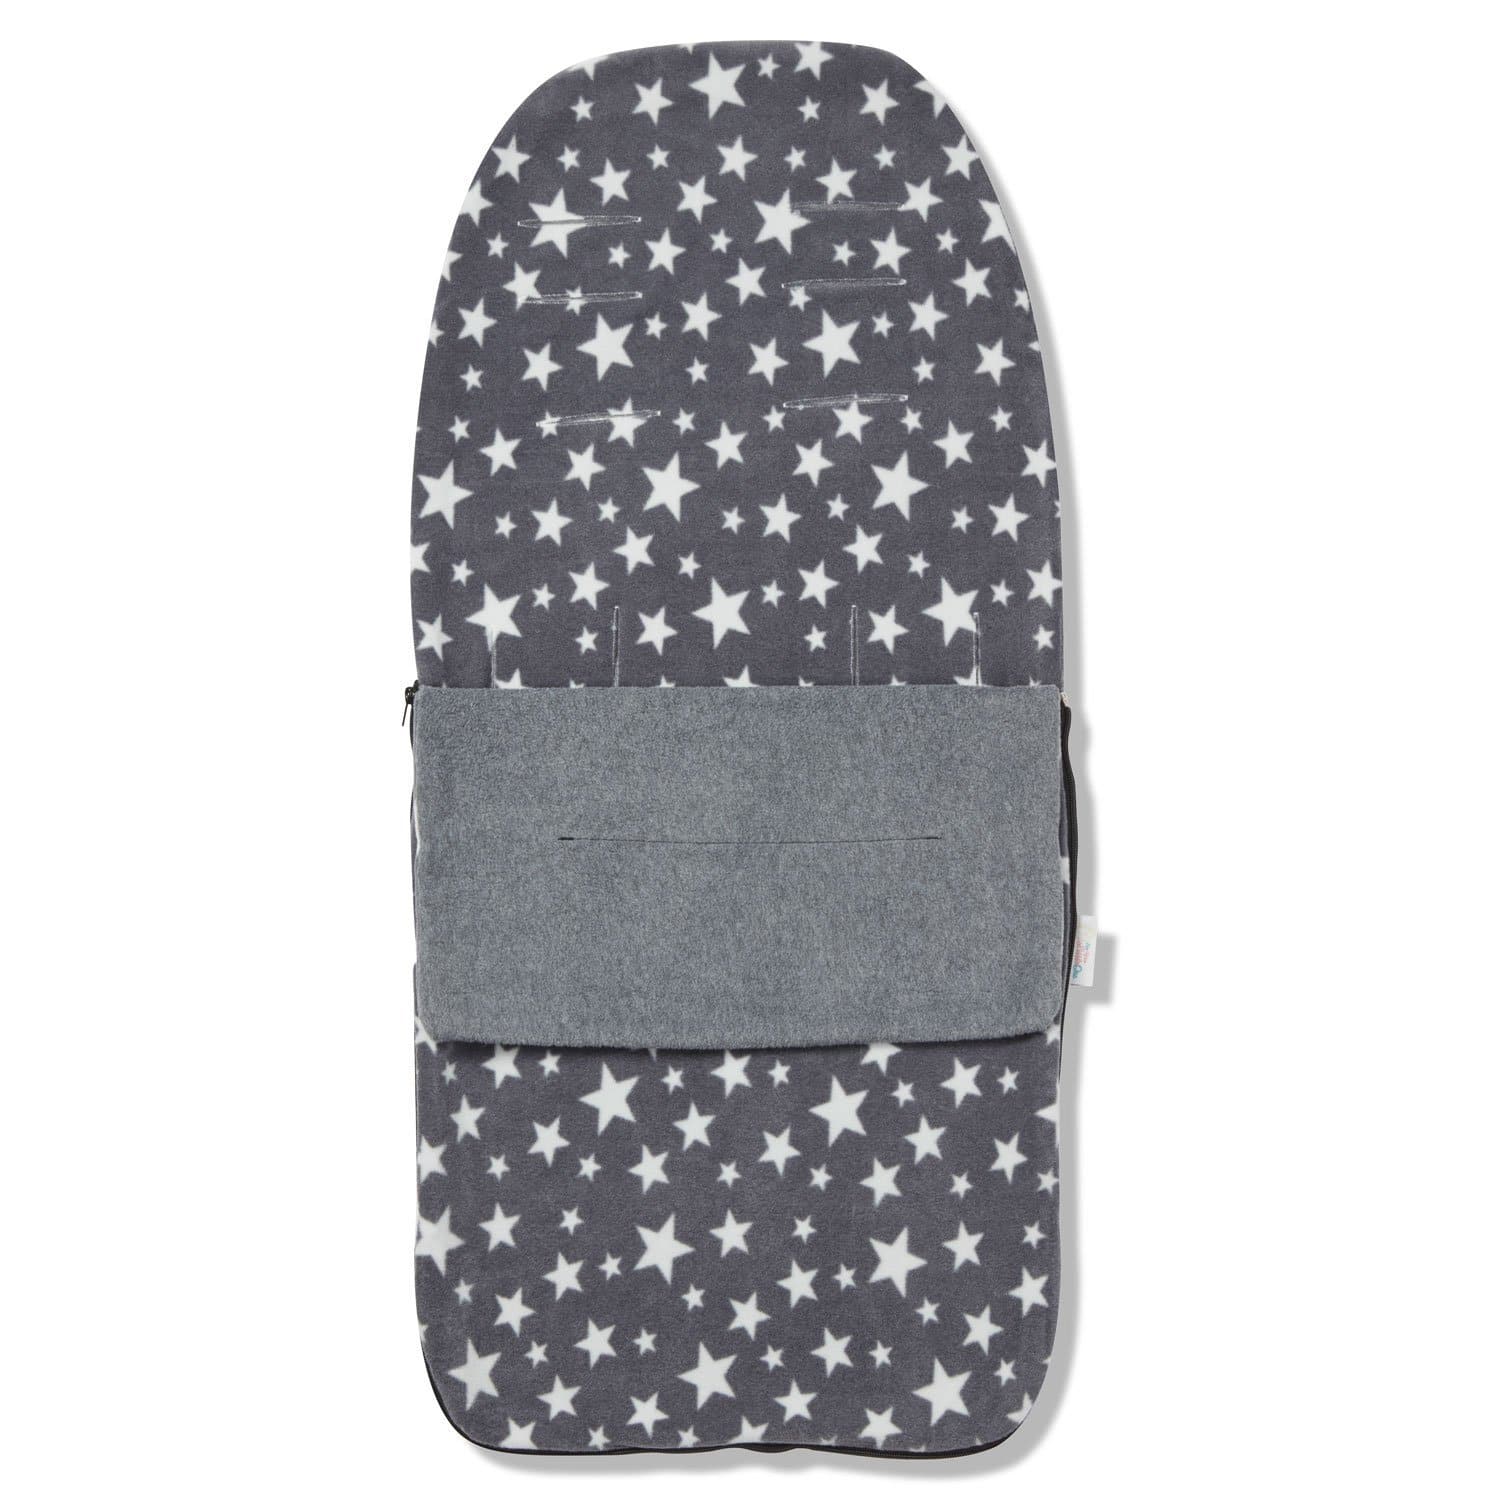 Snuggle Summer Footmuff Compatible with BabyDan - Grey Star / Fits All Models | For Your Little One